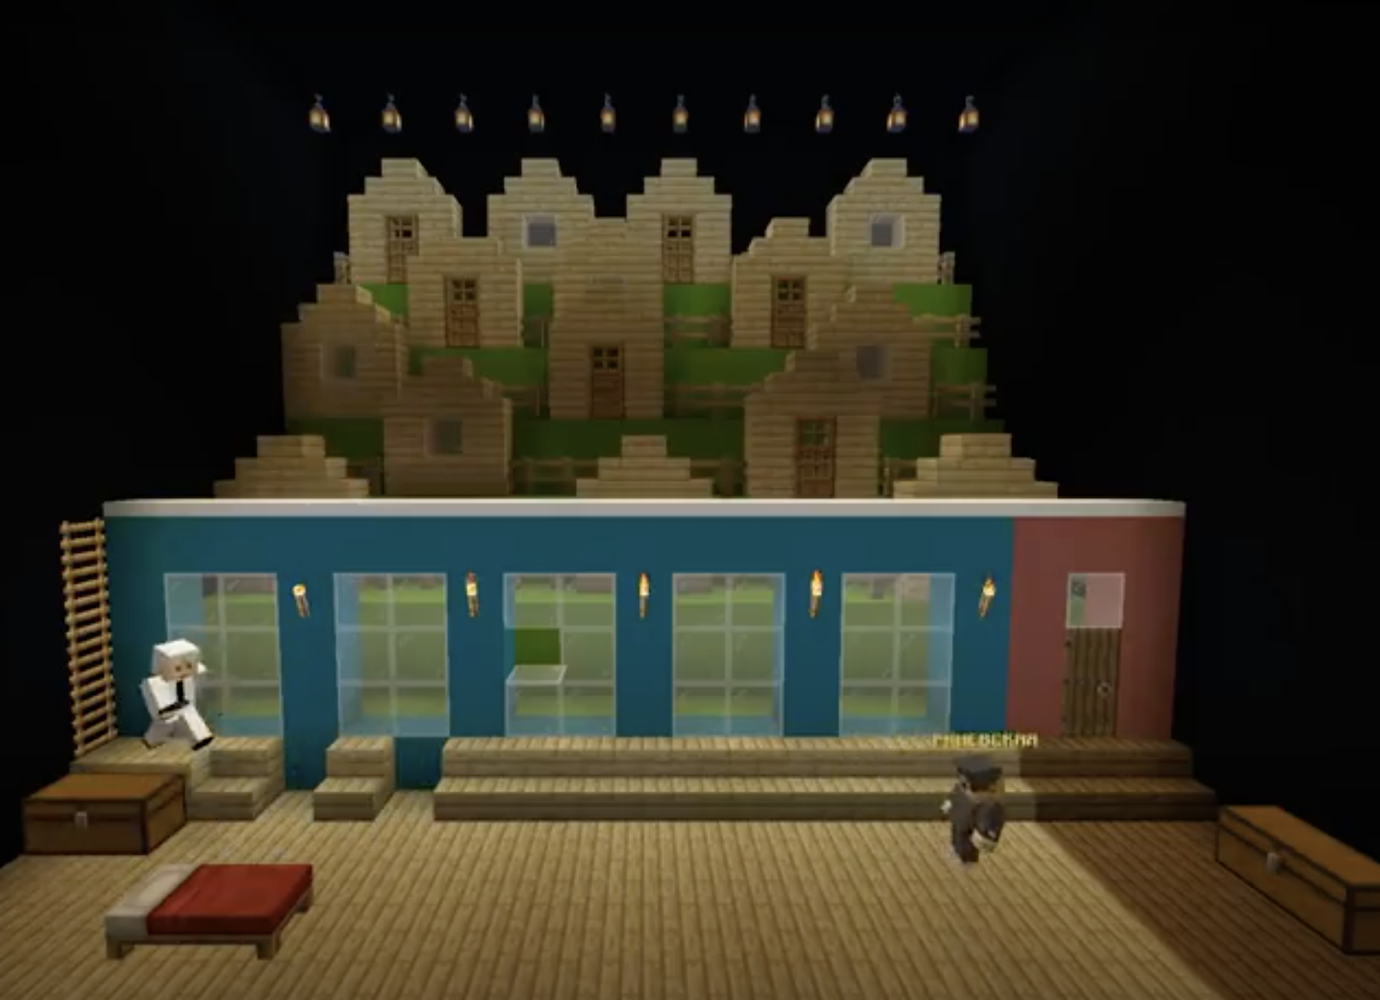 Russian theatre stages Chekhov’s The Cherry Orchard inside Minecraft